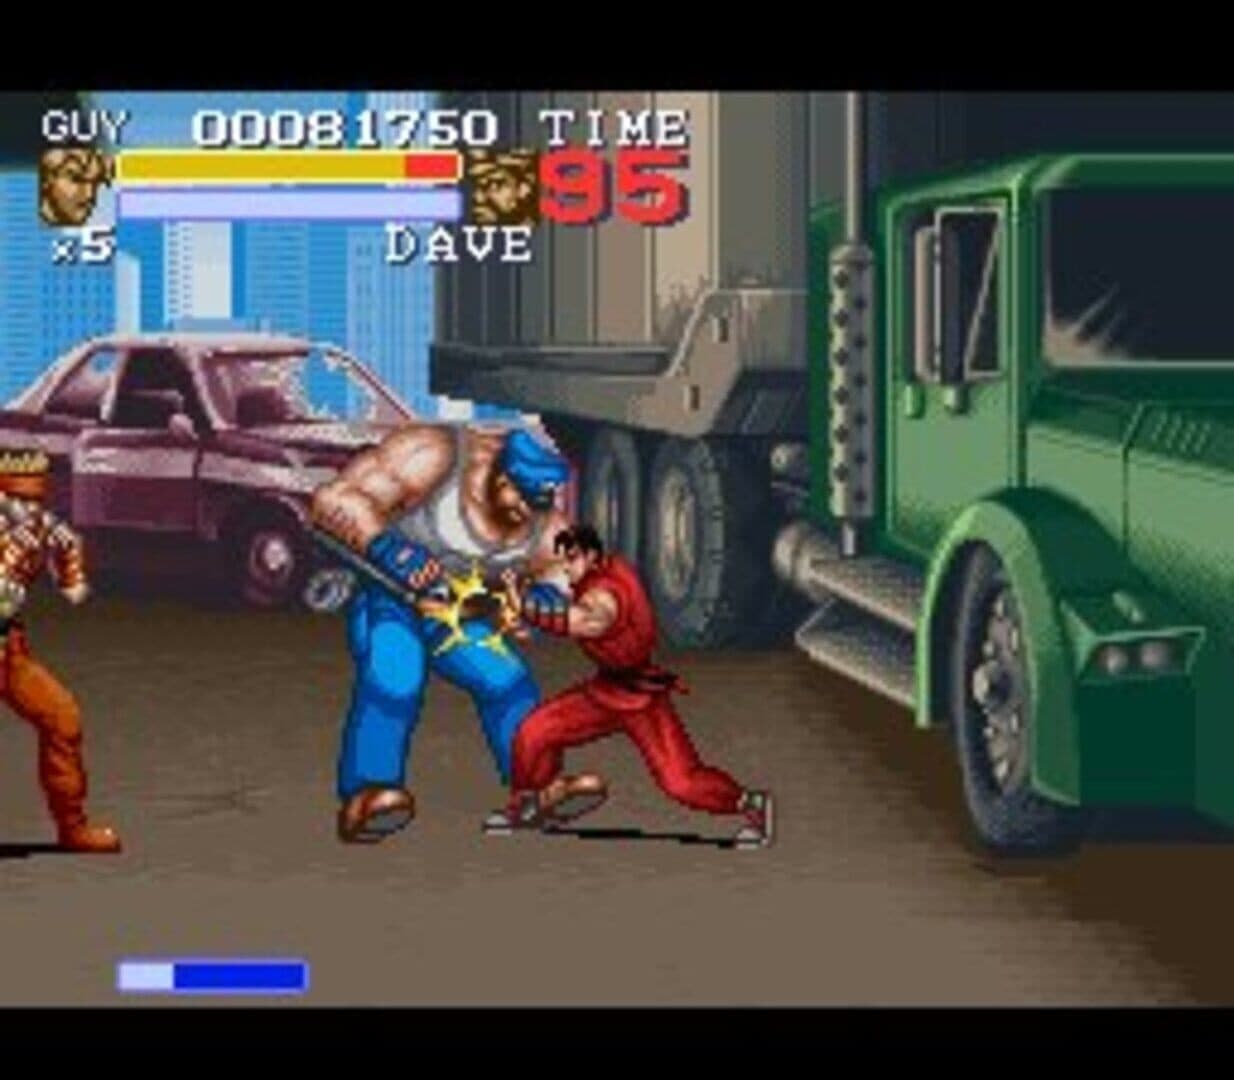 Final Fight 3 Image